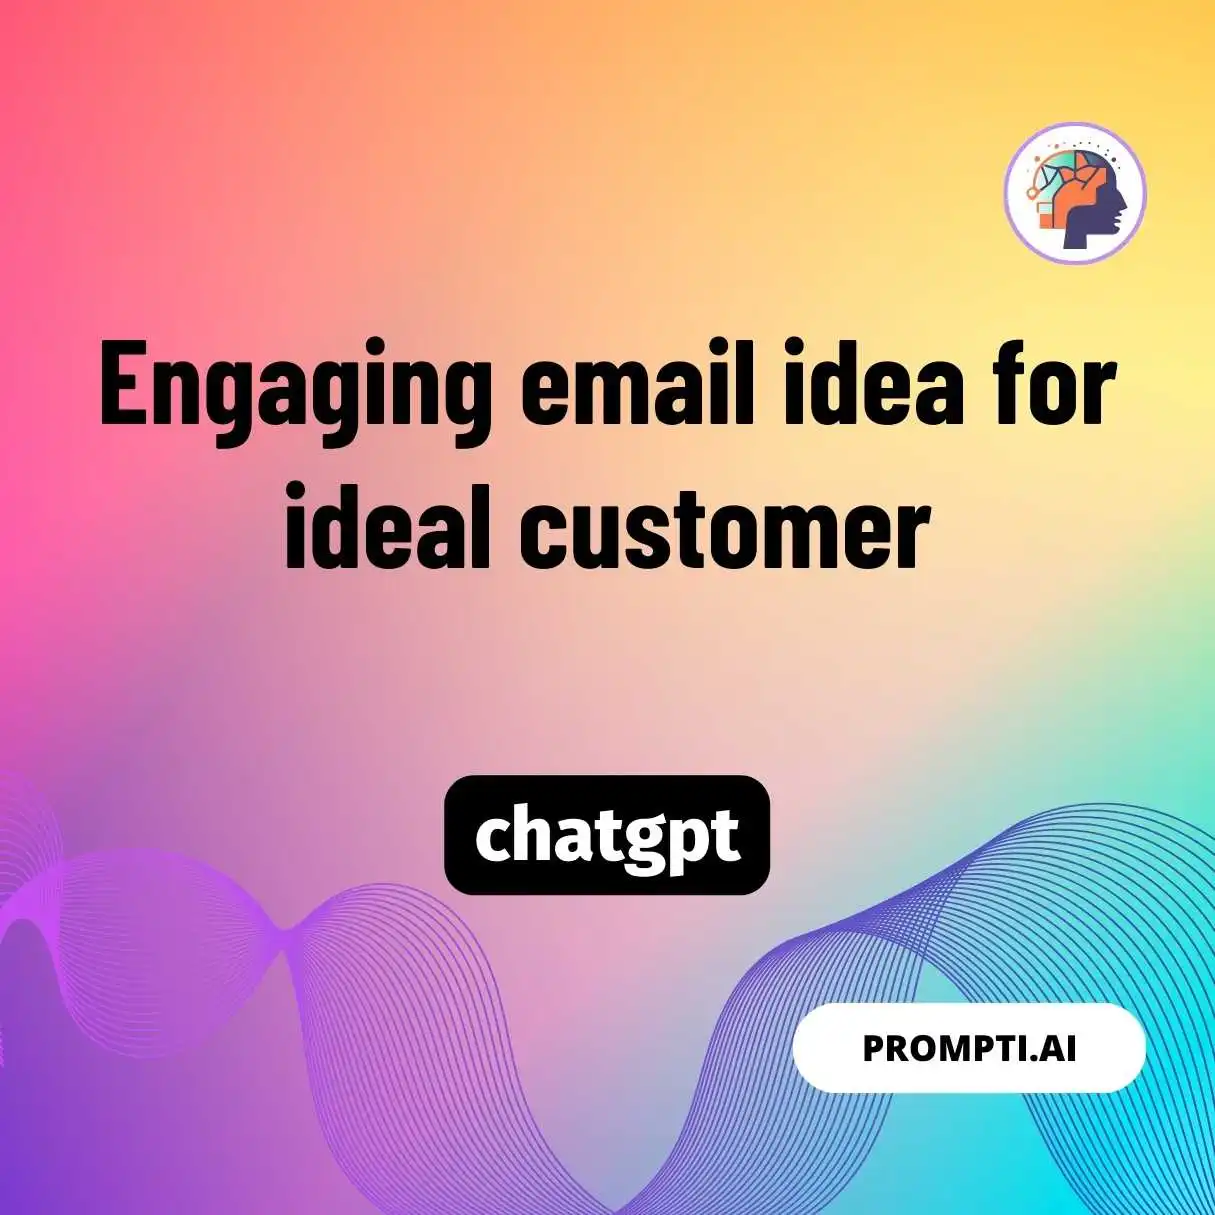 Engaging email idea for ideal customer